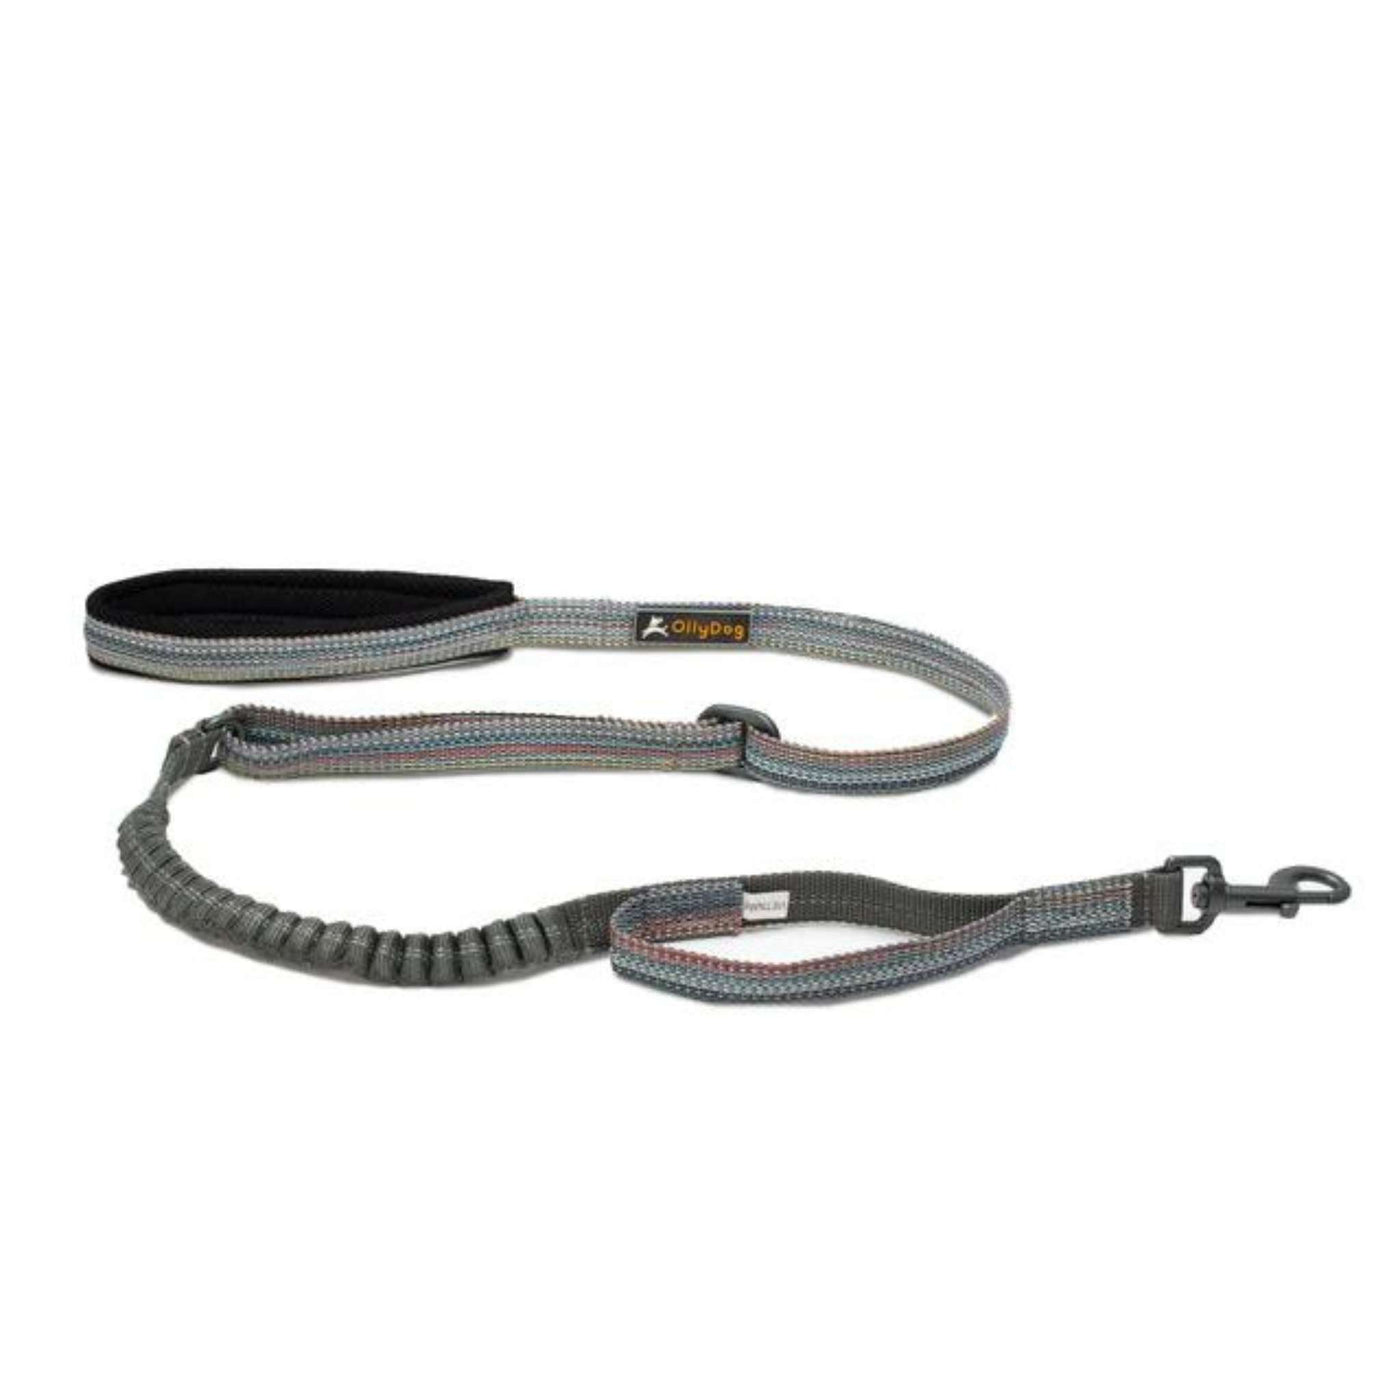 OllyDog Rescue Adjustable Spring Leash | Outdoor Dog Gear & Harnesses | Further Faster Christchurch NZ #prism